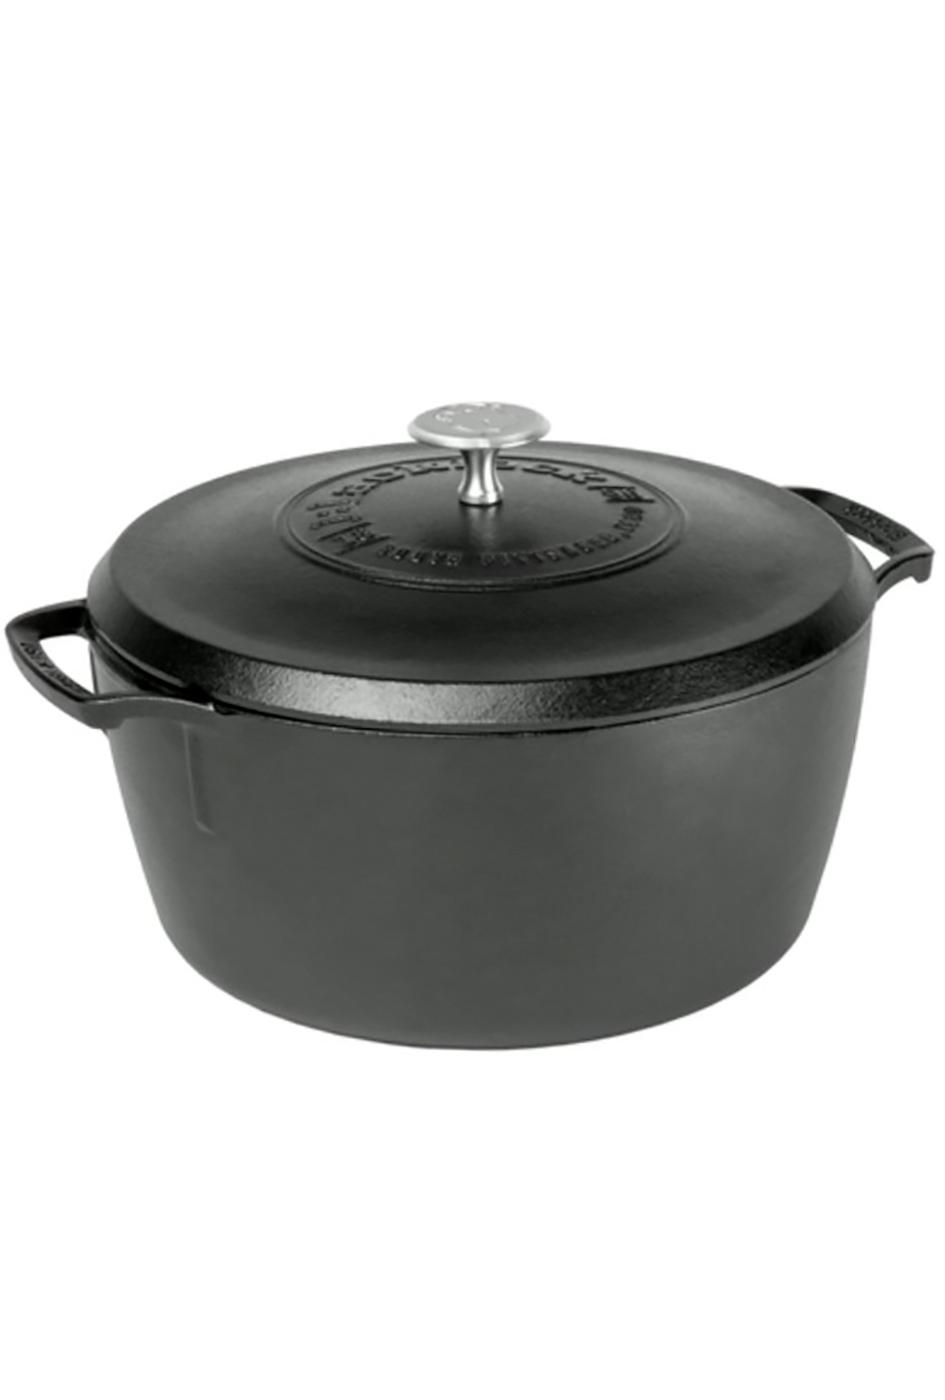  Lodge Blacklock 17 Triple Seasoned Cast Iron Braiser with Lid -  Dutch Oven with Nonstick Finish - Lightweight Cast Iron Braiser - Dutch Oven  Cookware - Cooking Pot with High-Heat Aluminum